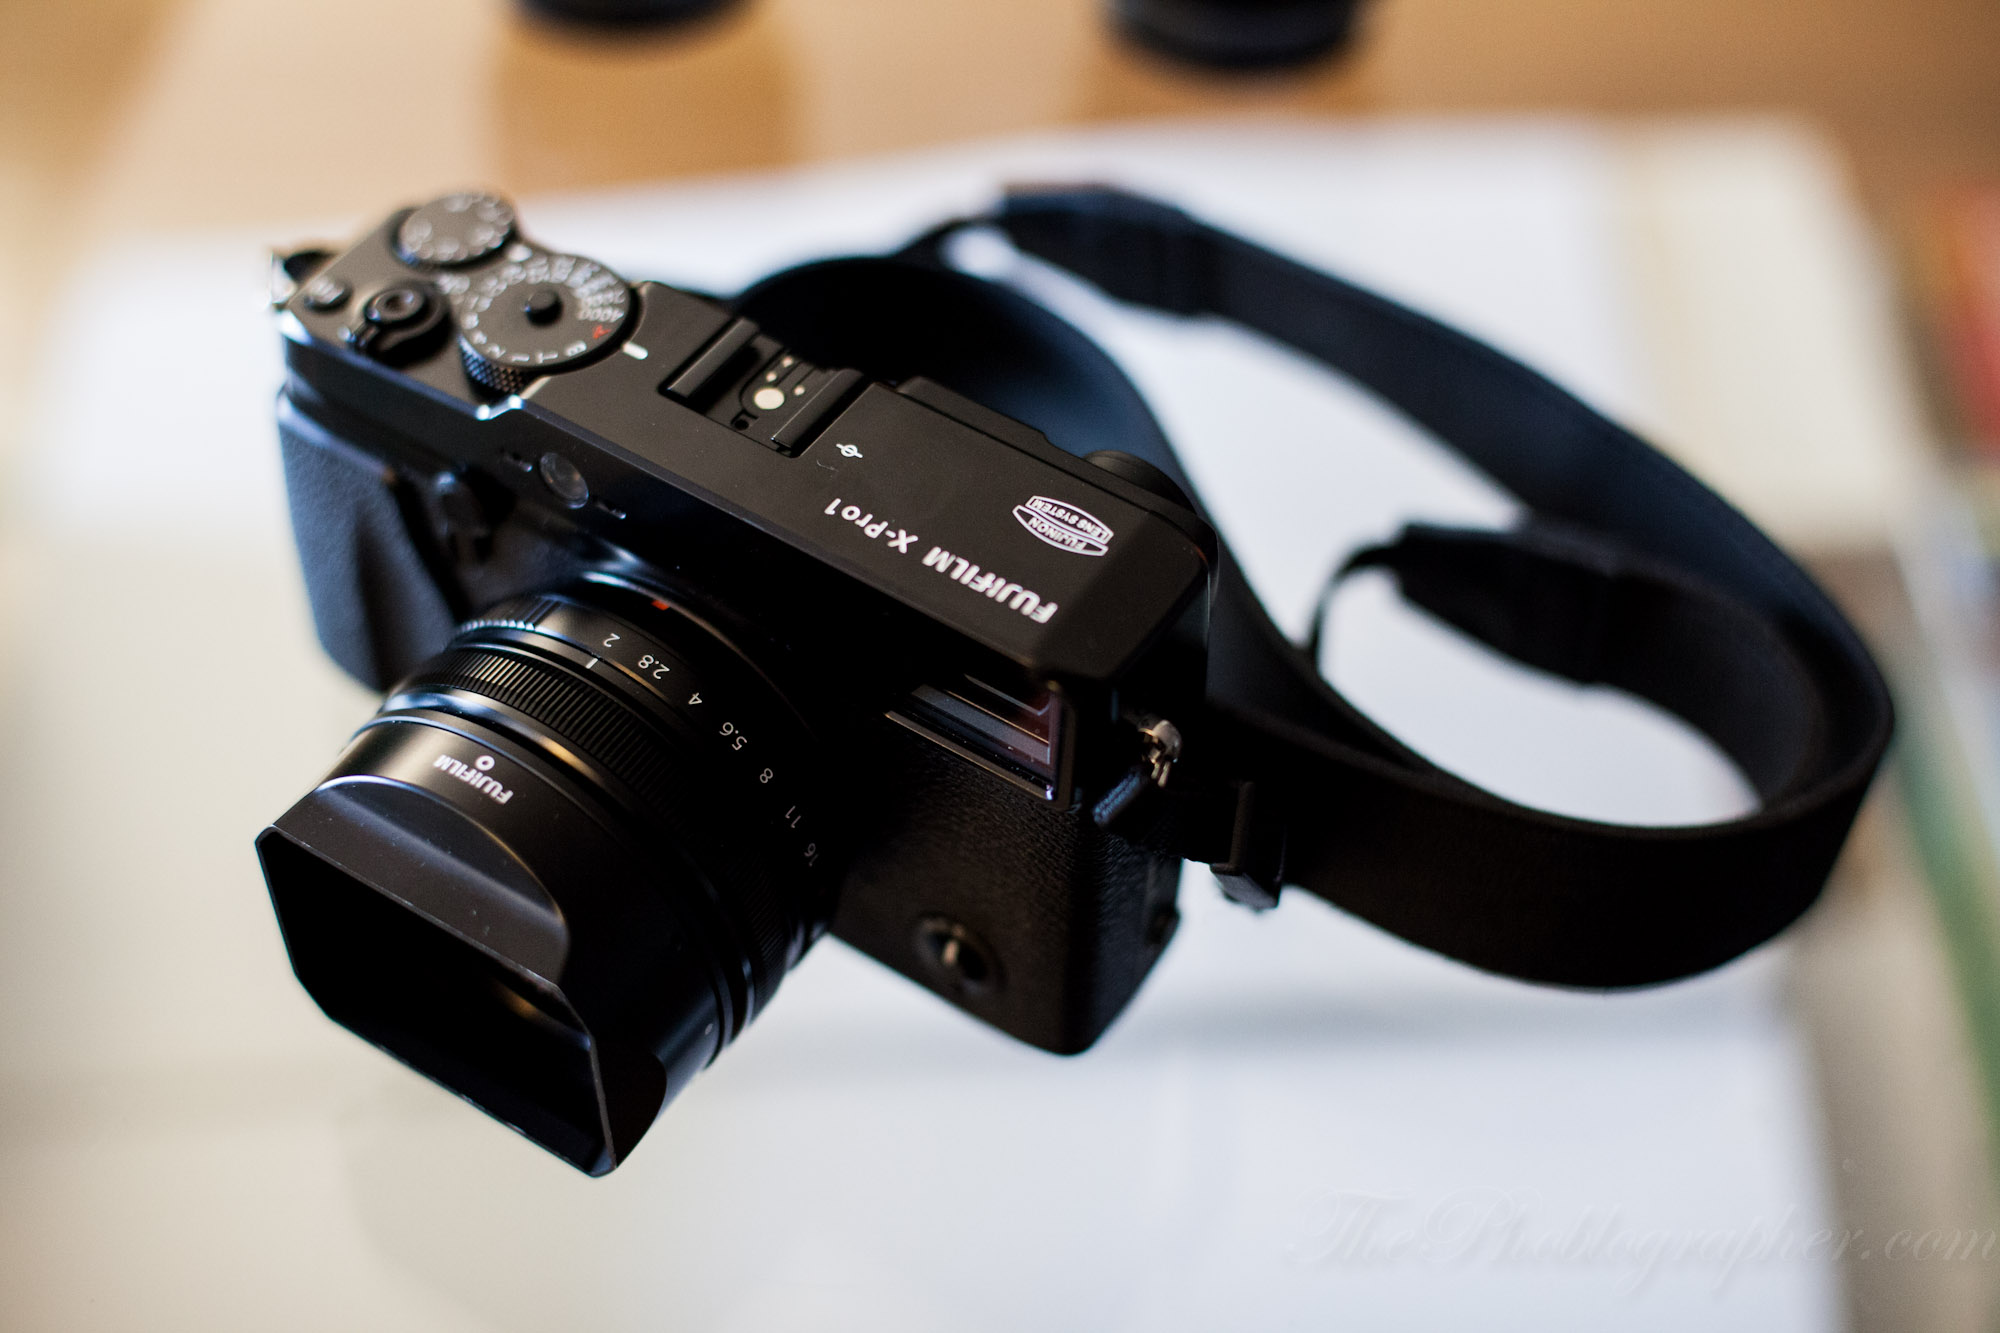 Plunderen agenda Met opzet Hands On Review: Fuji X Pro 1 Camera System (With Sample Images) - The  Phoblographer